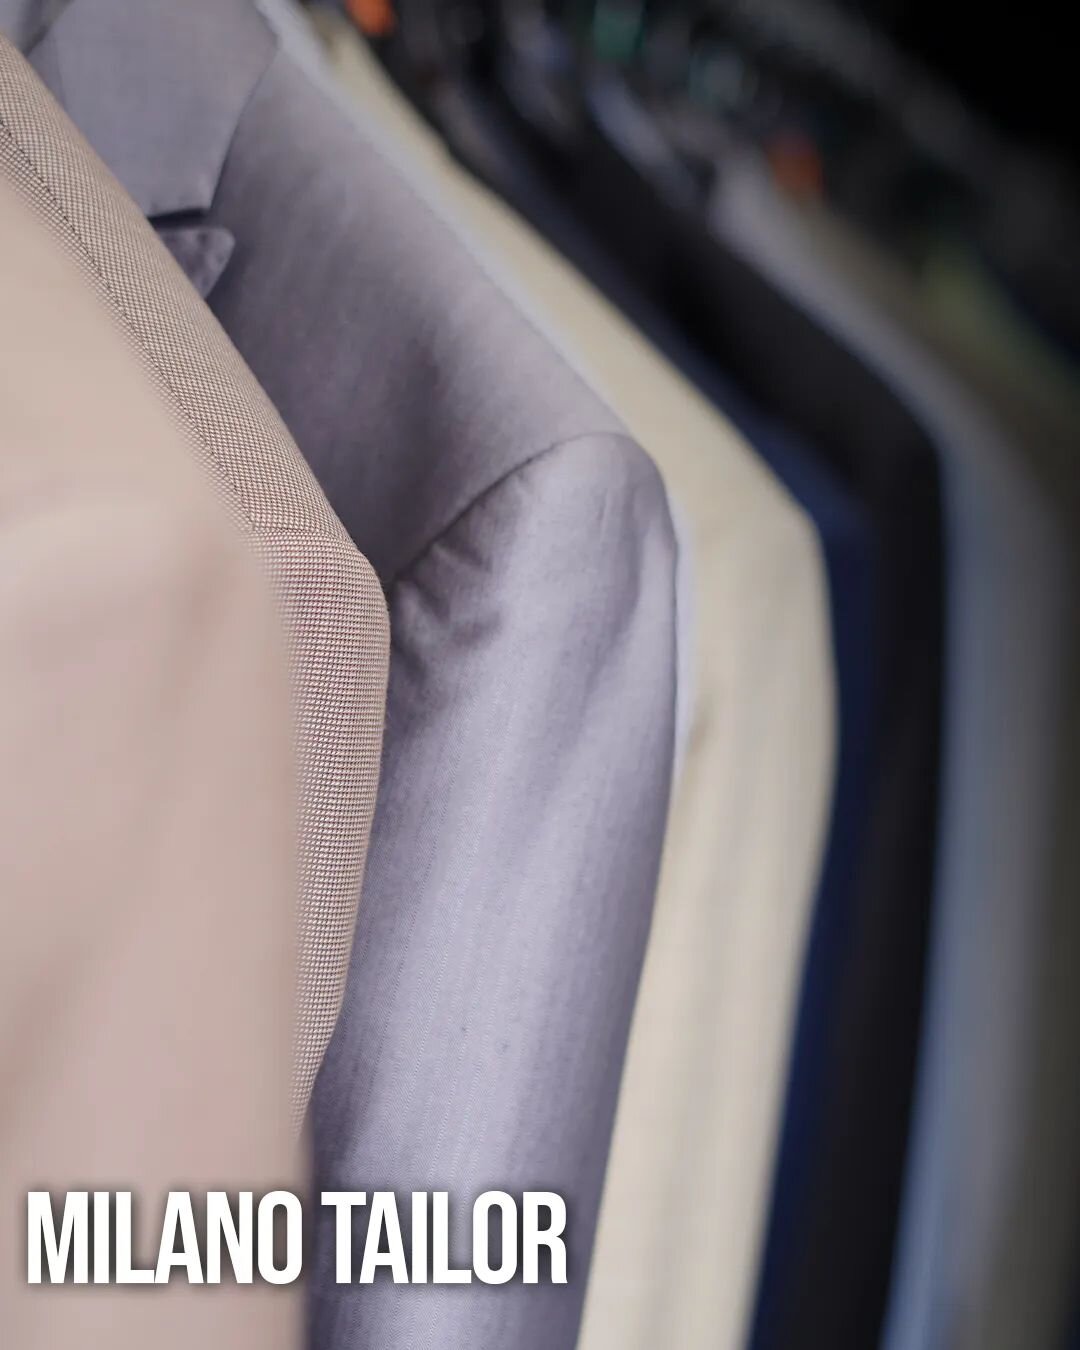 What's your go-to color in fall?
---
🗺 Located at 4025 Auburn Rd, Shelby Township🗺
📞 Contact Us (586) 739-3006 📞
---
#shelbytwp #milanotailor #michigan #suit #instagramfashion #fallfashion #milanotailor